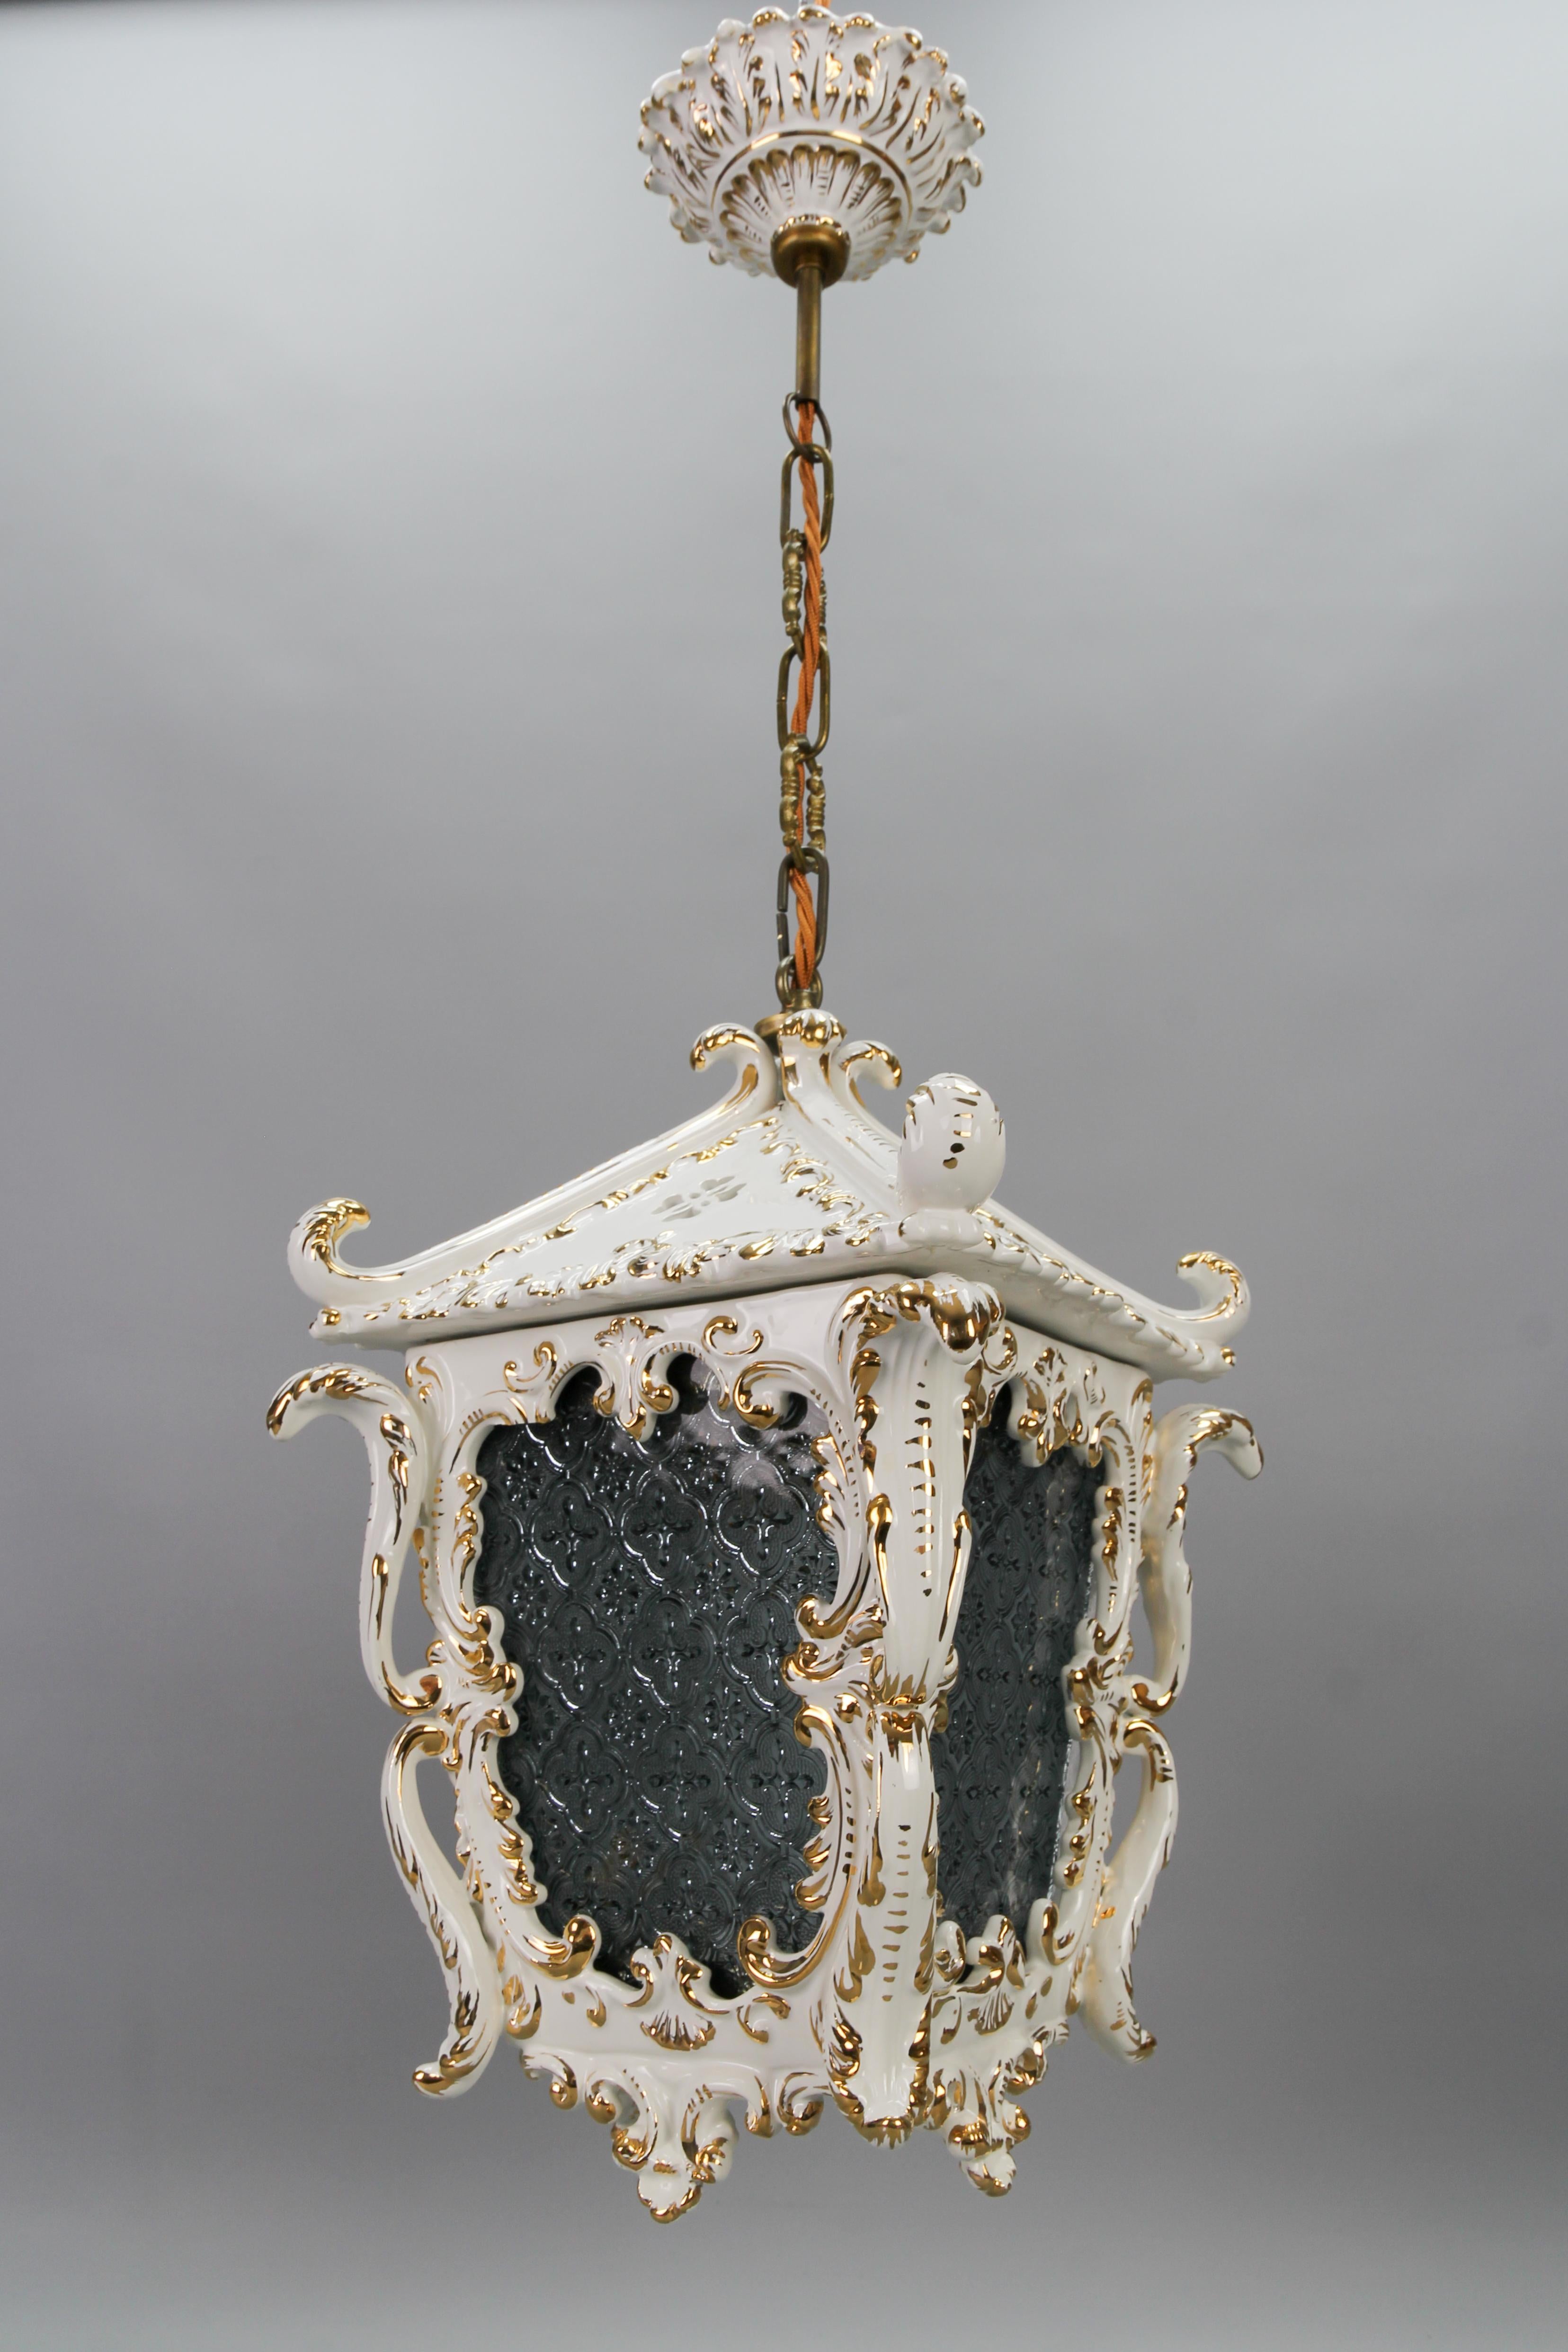 Vintage Rococo style white ceramic and glass hanging lantern, France, circa the 1970s.
This adorable pendant light fixture features a white ceramic lantern and a beautiful canopy with golden accents - Rococo-style scrolls, and leaves. Four ornate